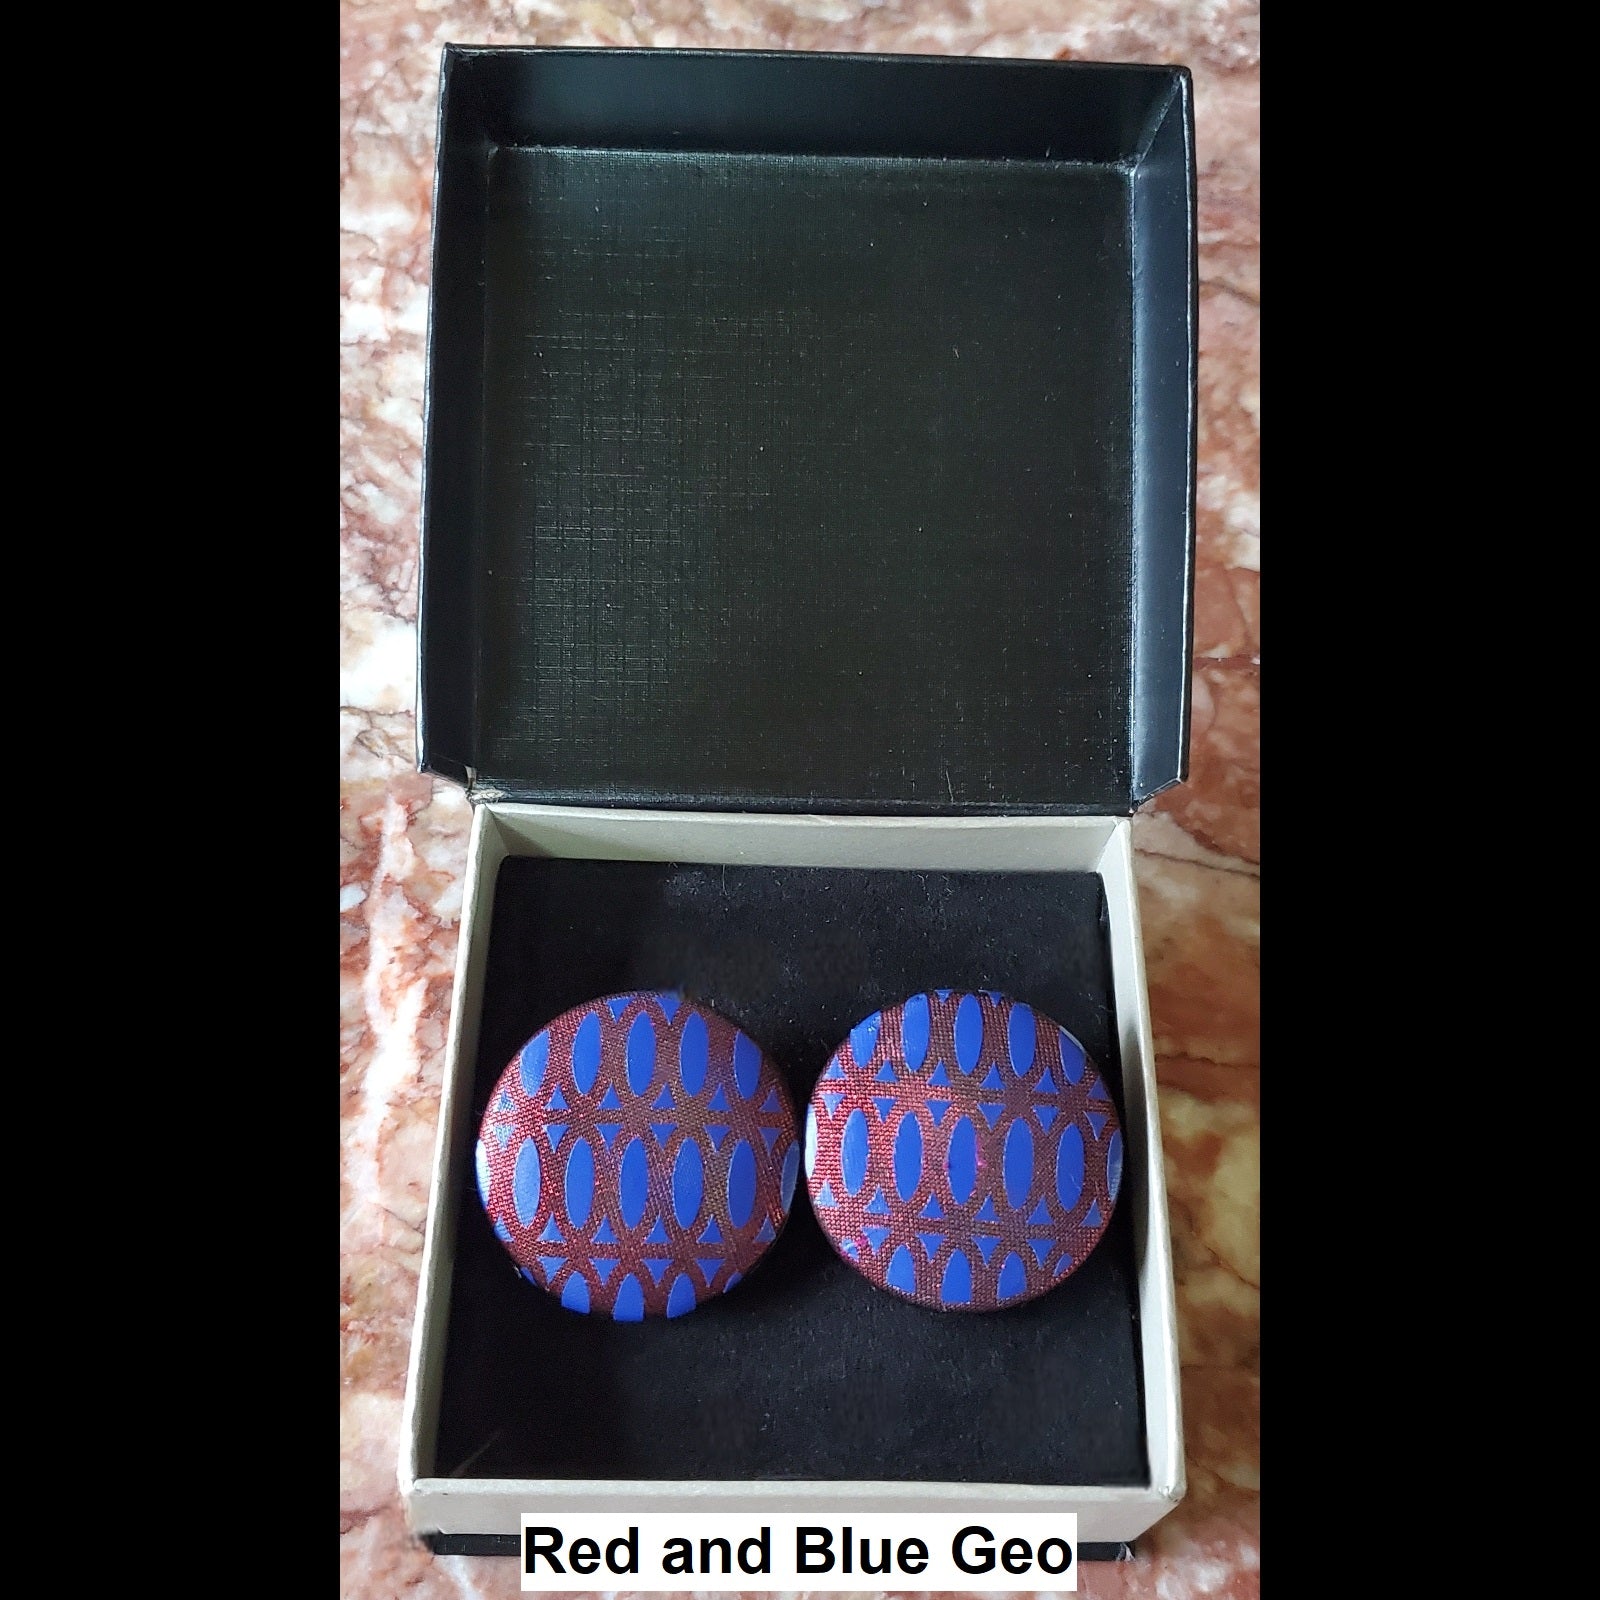 Red and Blue Geo print button earrings in jewelry box